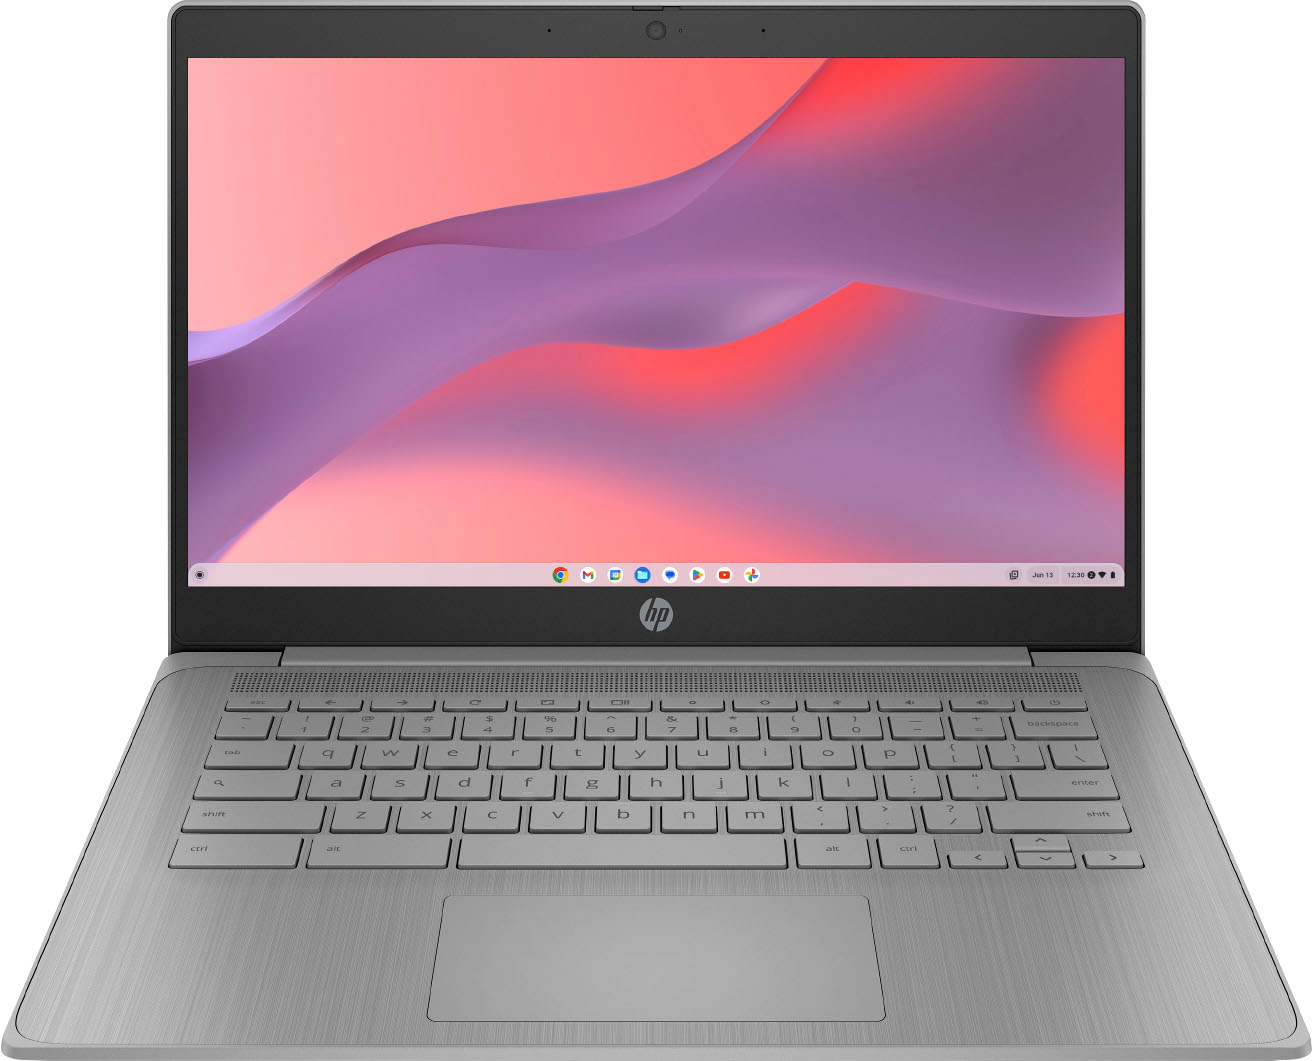 HP Store - Buy HP Products Online at Best Price from Vijay Sales